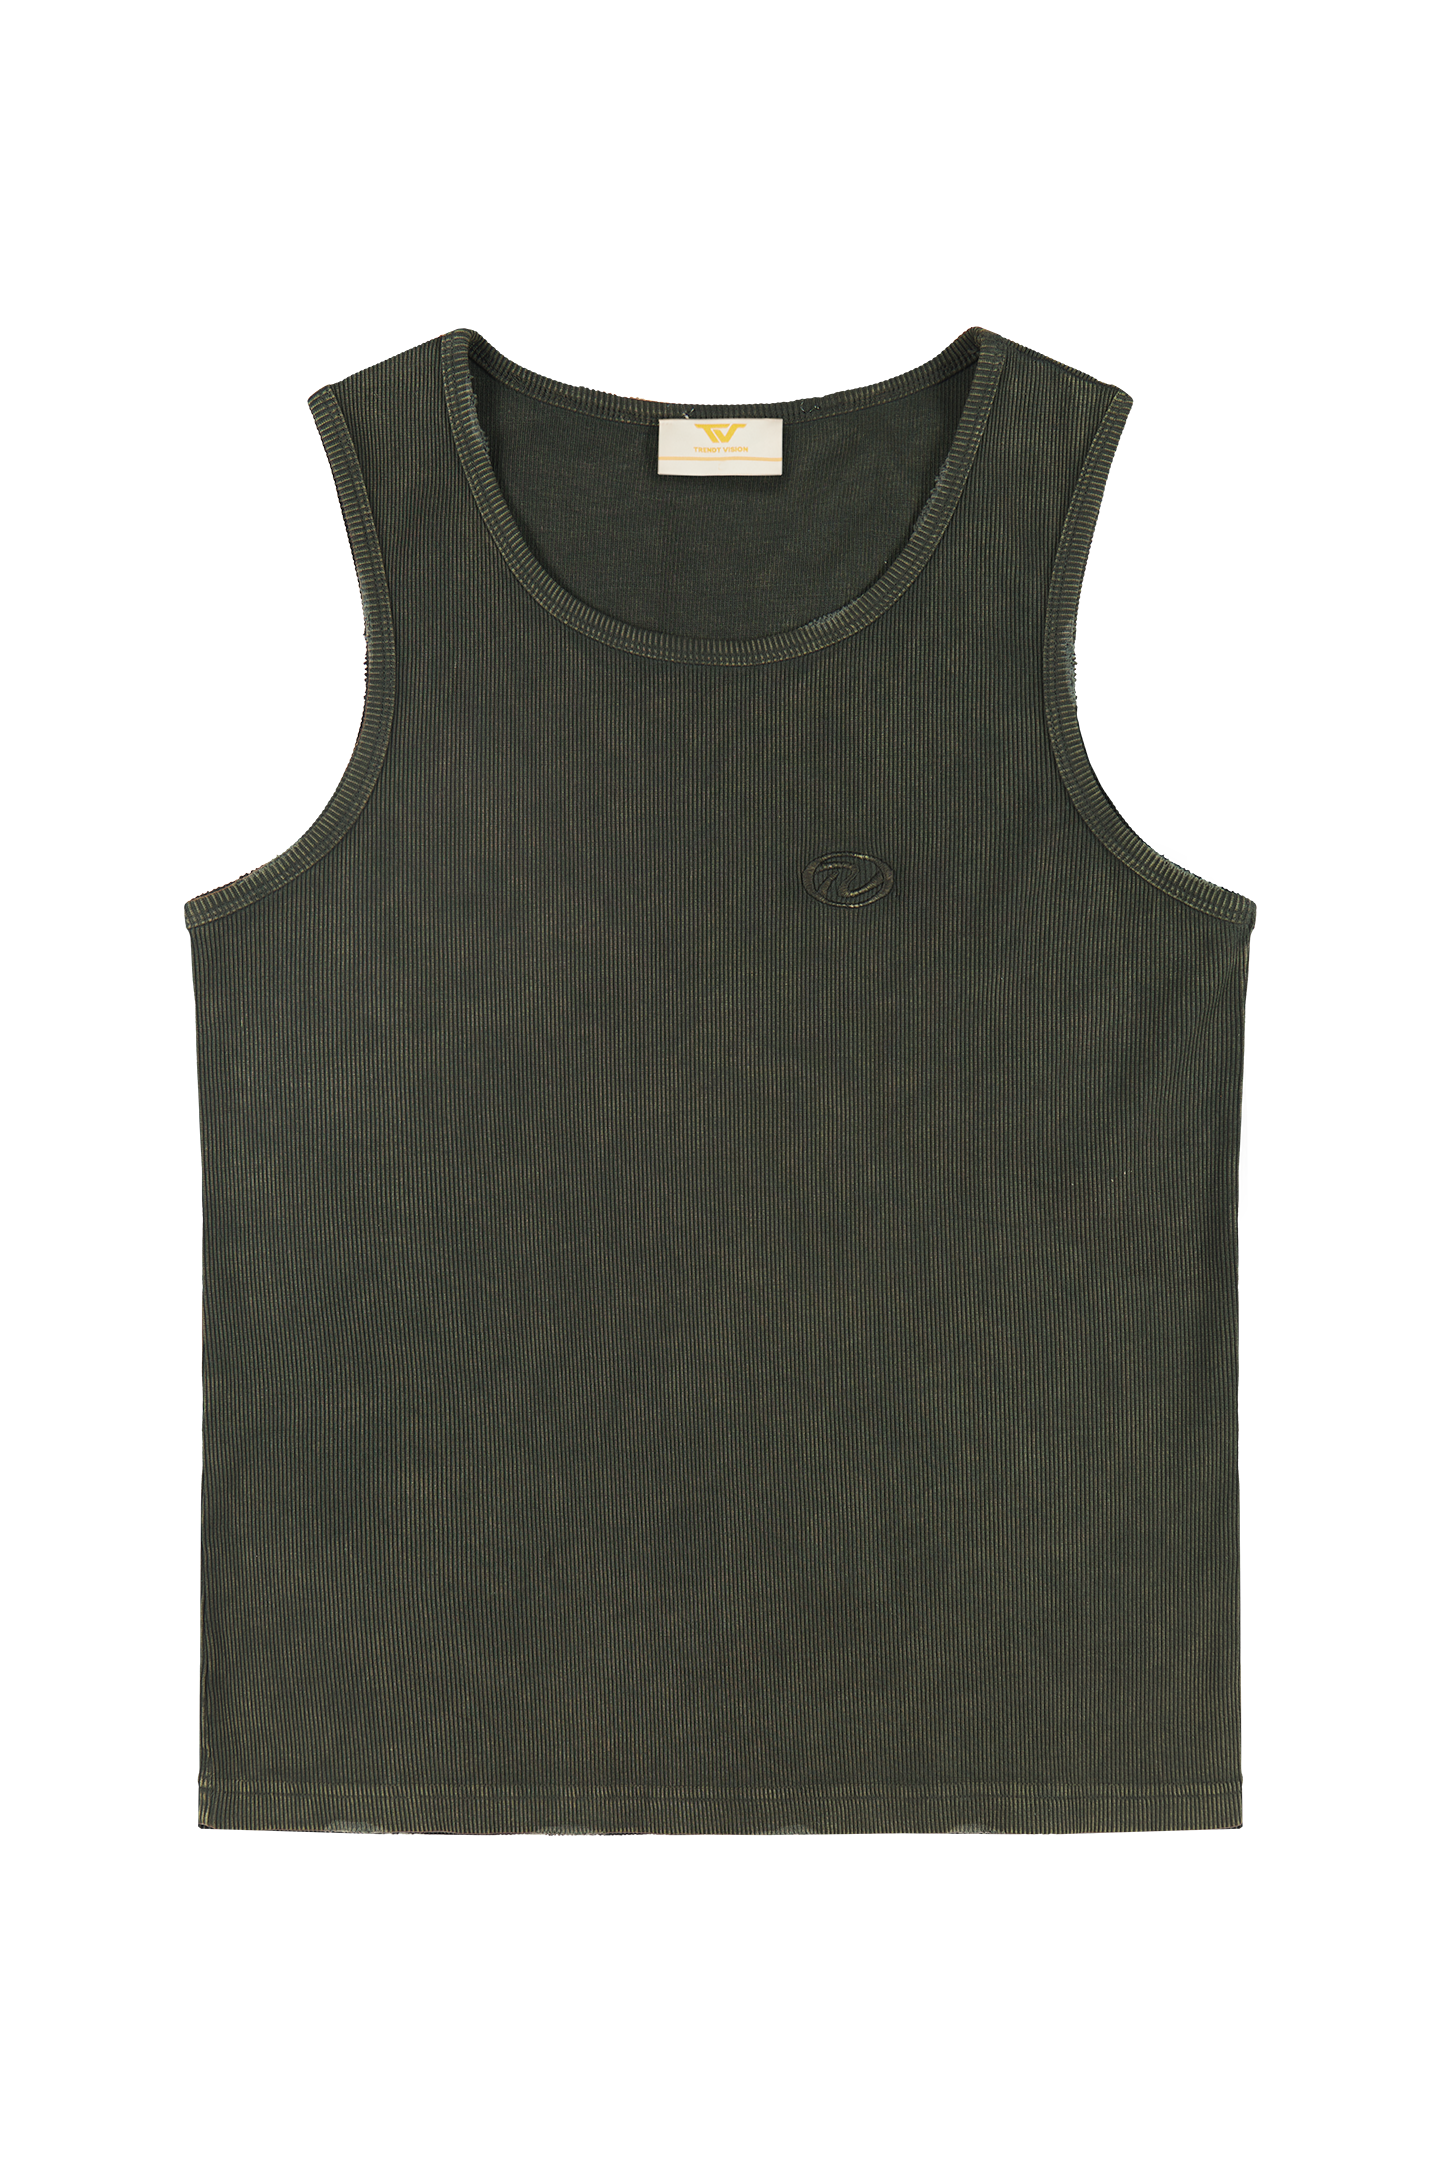 Olive "Echoes" Tank Top